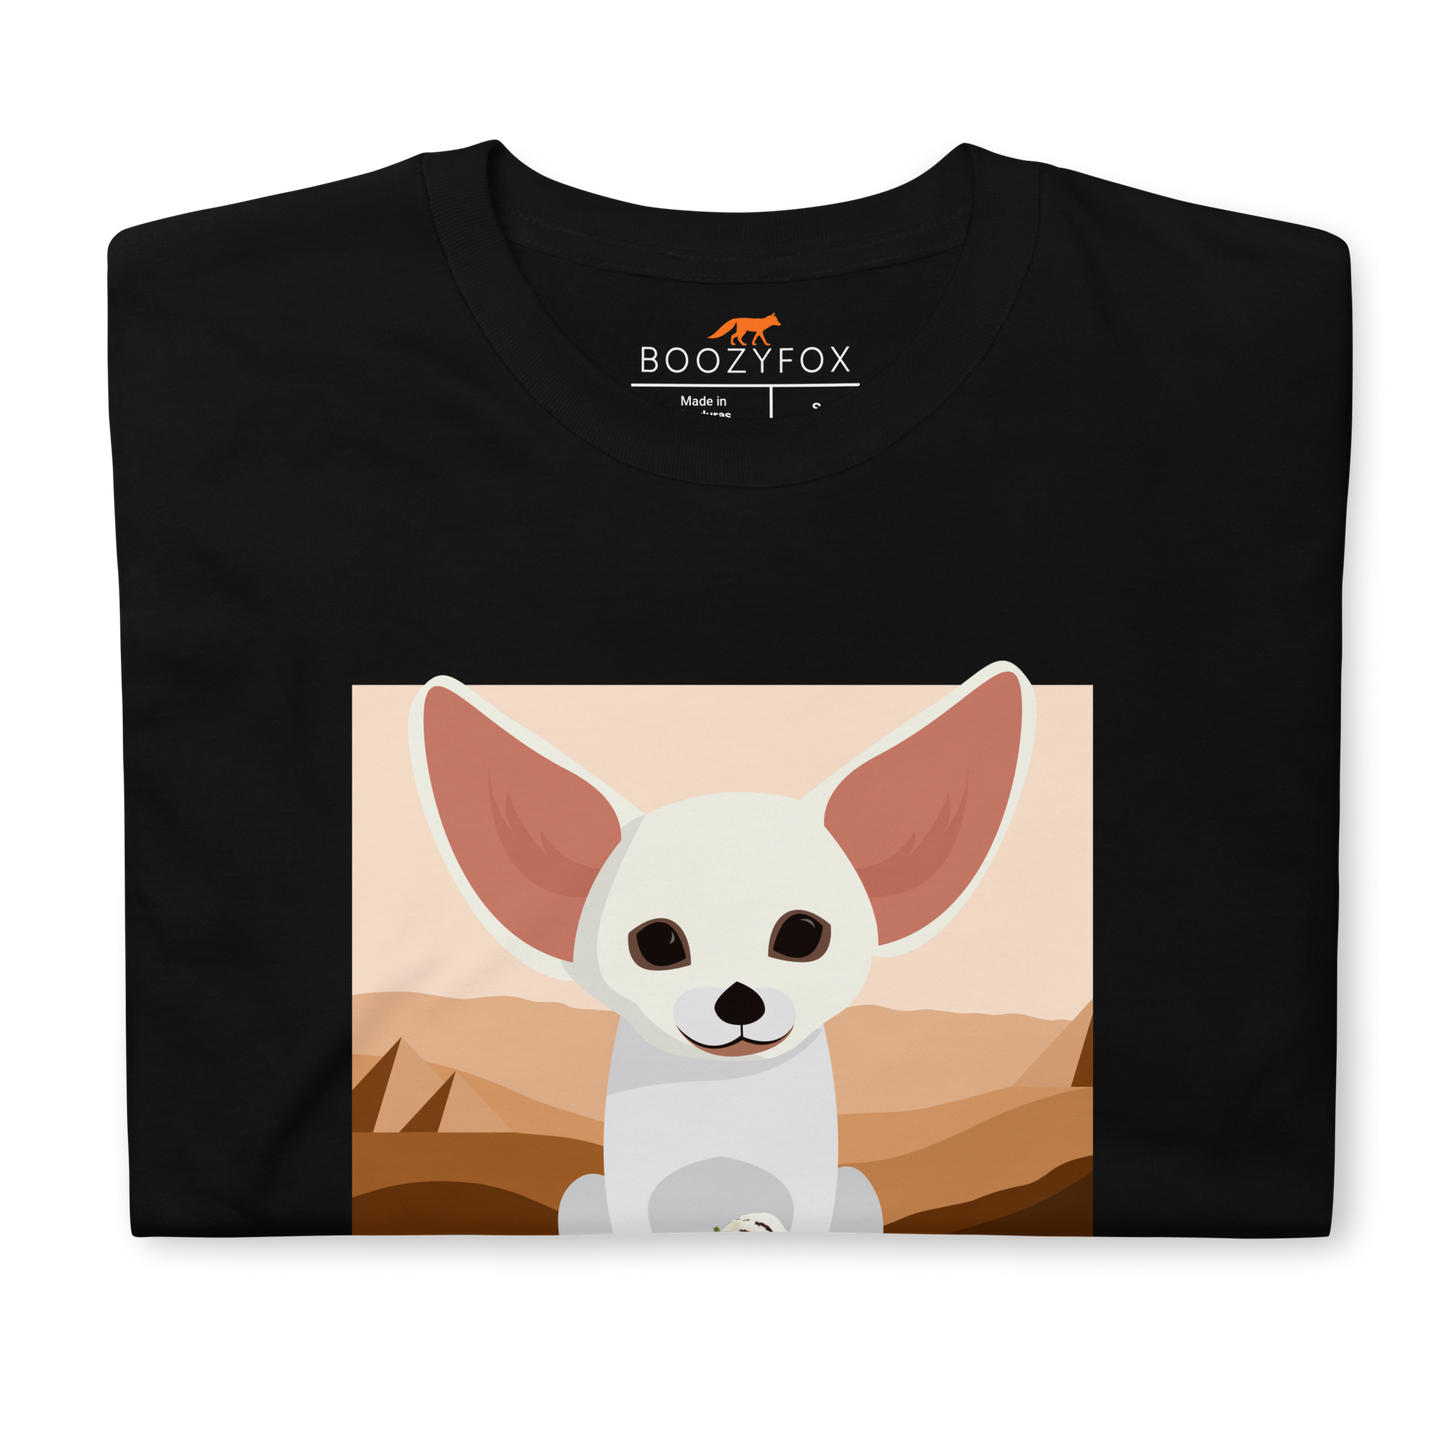 Front Details of a Black Fennec Fox T-Shirt featuring an adorable Dessert Addict graphic on the chest - Cute Graphic Fennec Fox T-Shirts - Boozy Fox